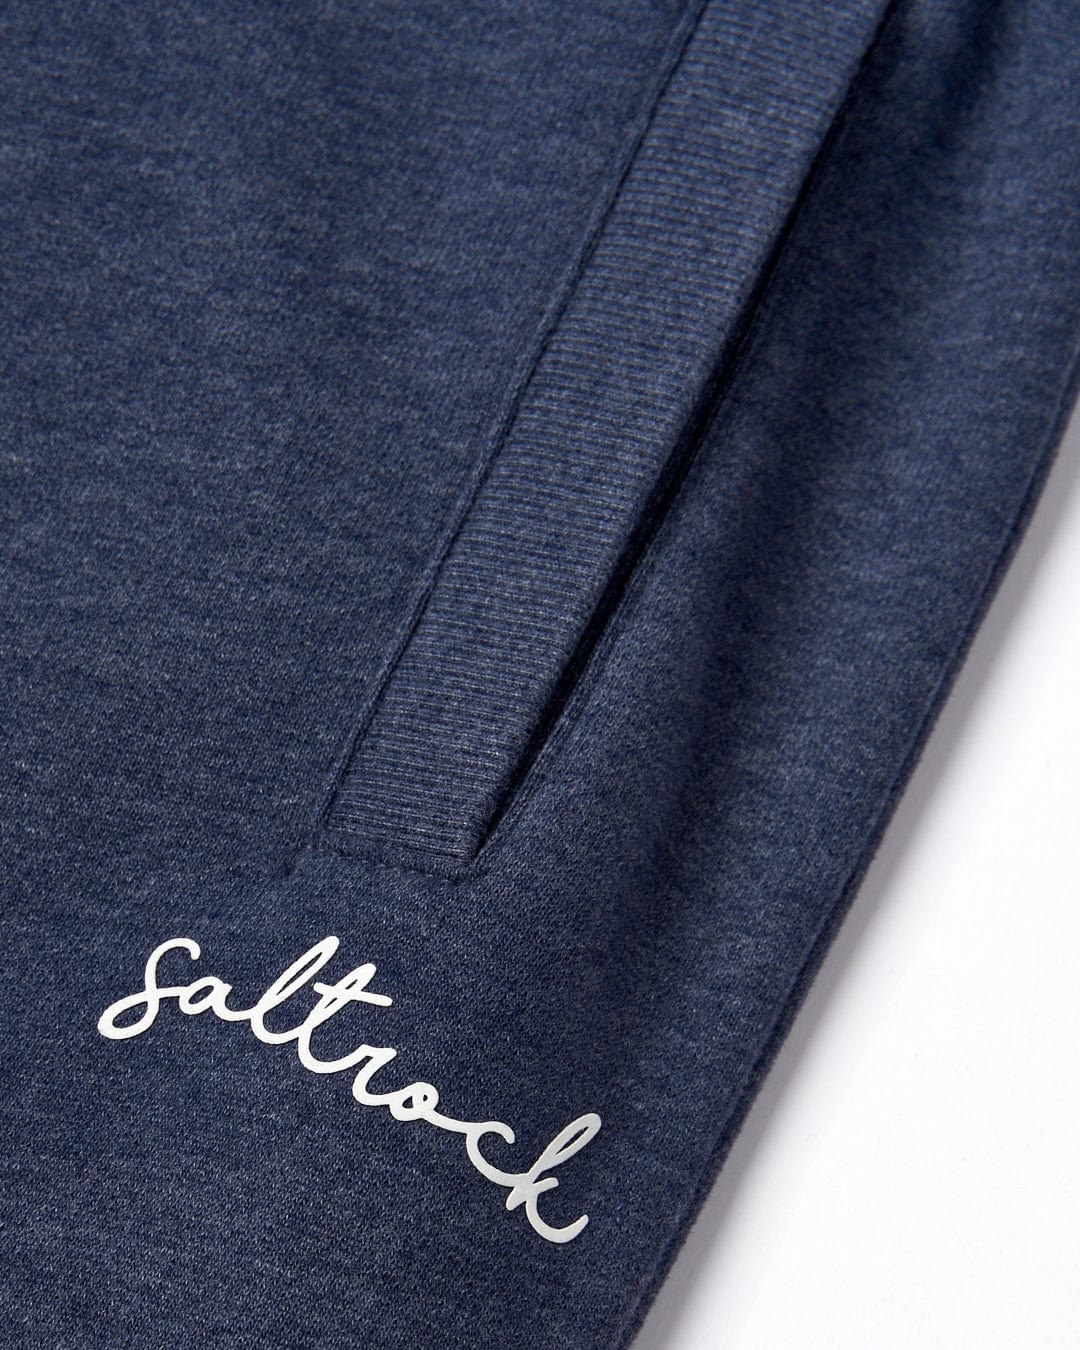 Close-up of a navy blue Velator - Womens Joggers - Blue Marl textile with a stitched Saltrock branding on the elasticated waist.